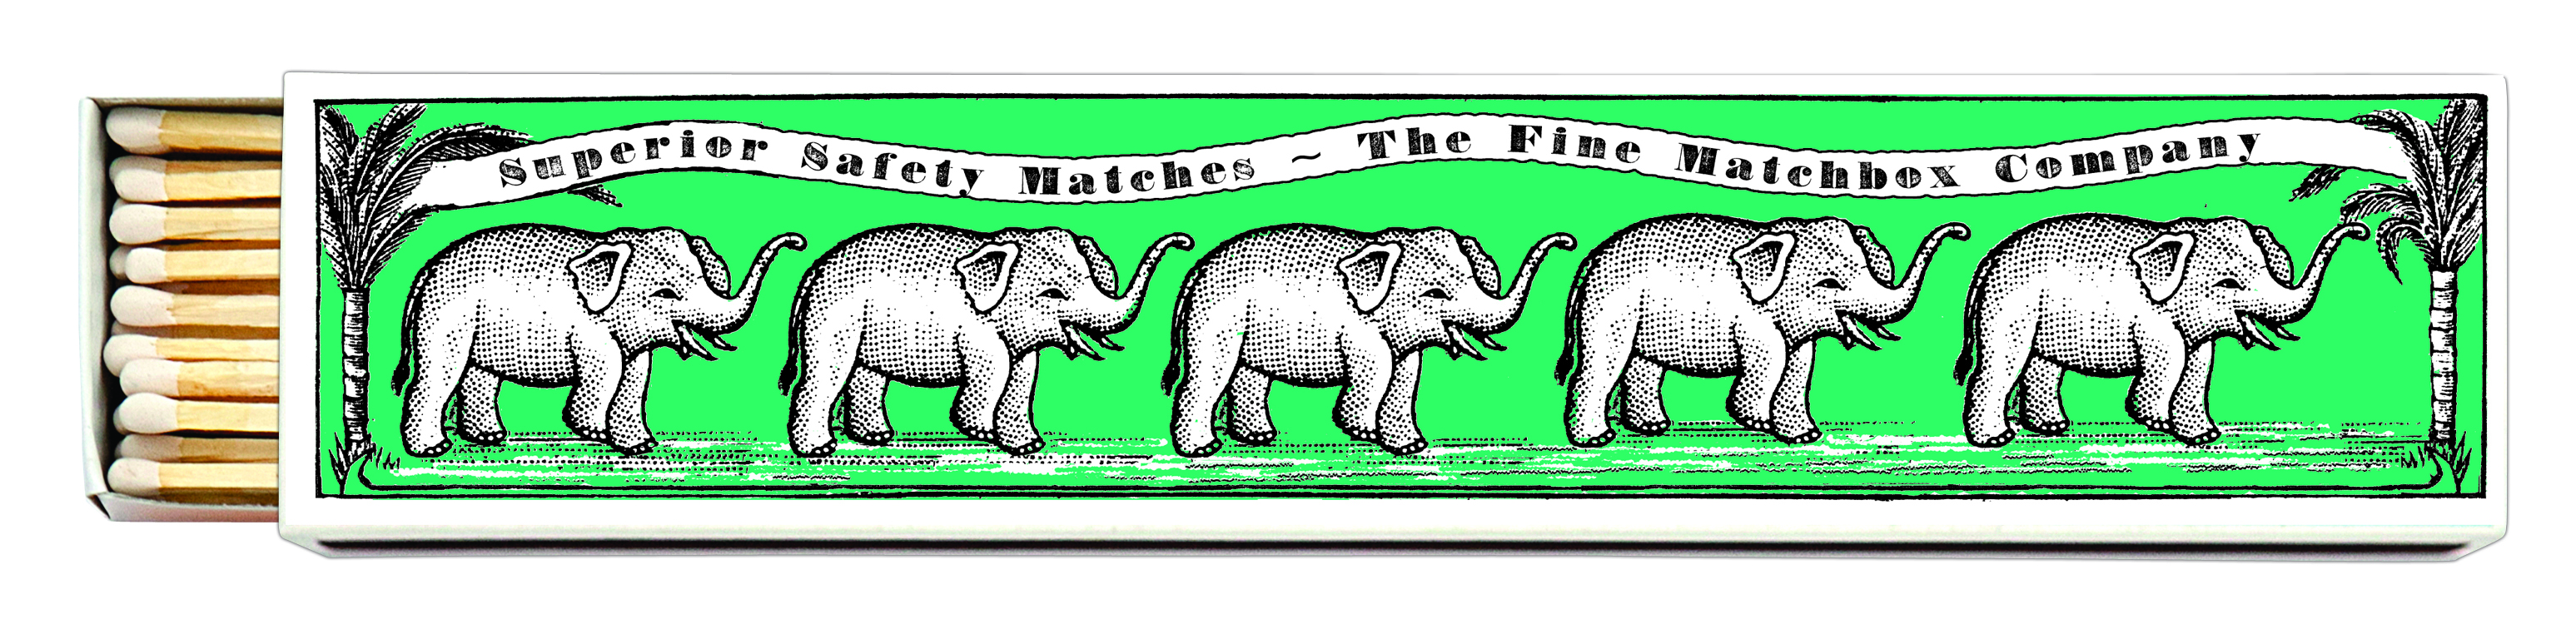 Green Elephants - Long Matchboxes - Archivist - from Archivist Gallery view